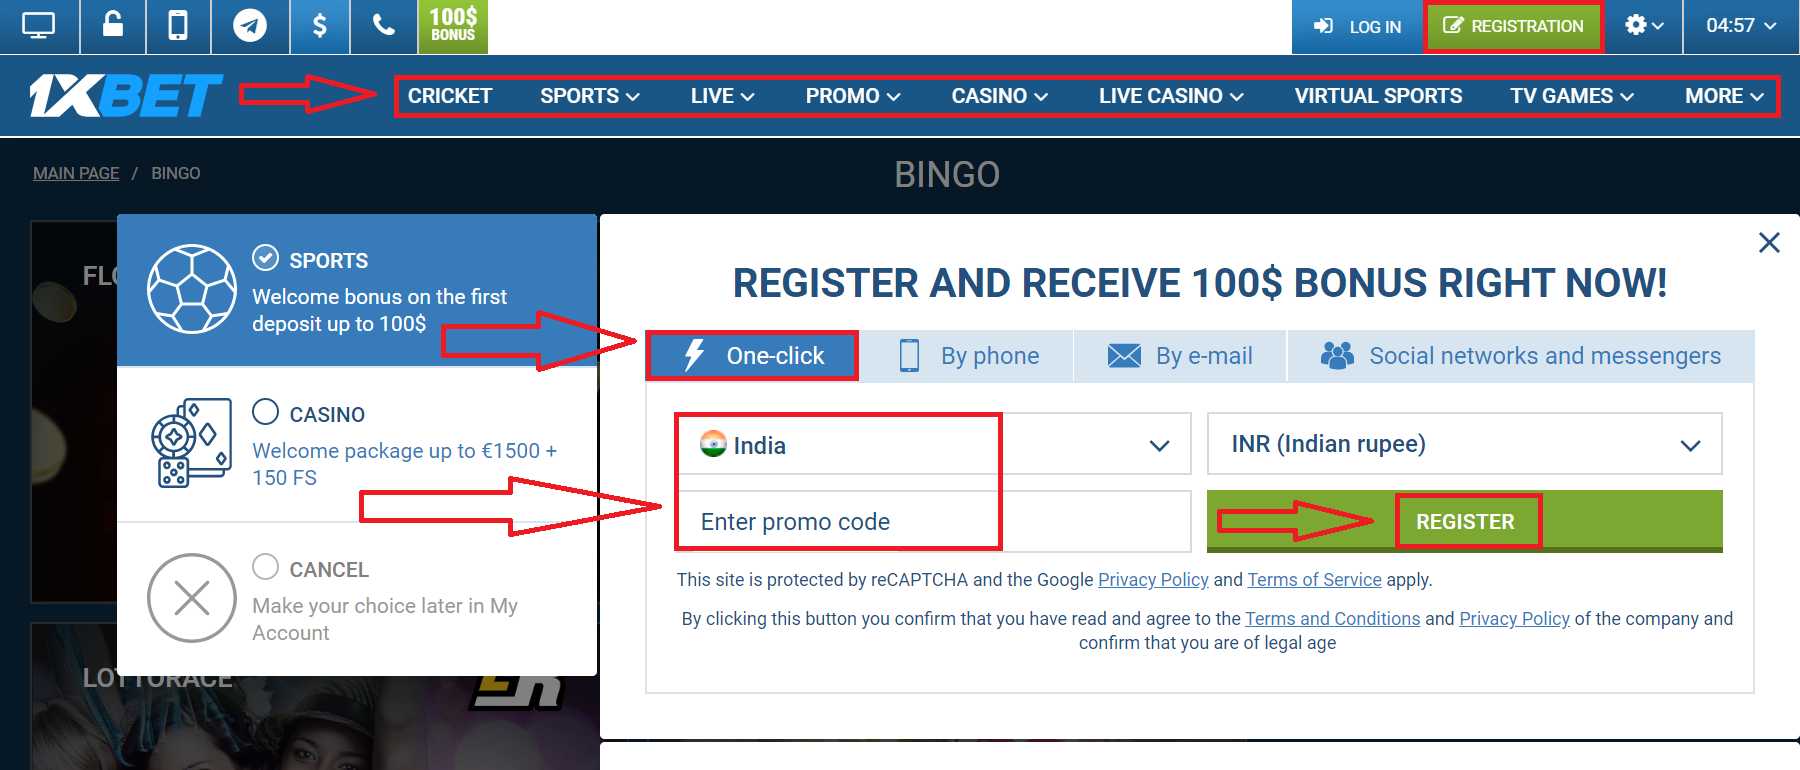 How to Complete 1xBet Registration